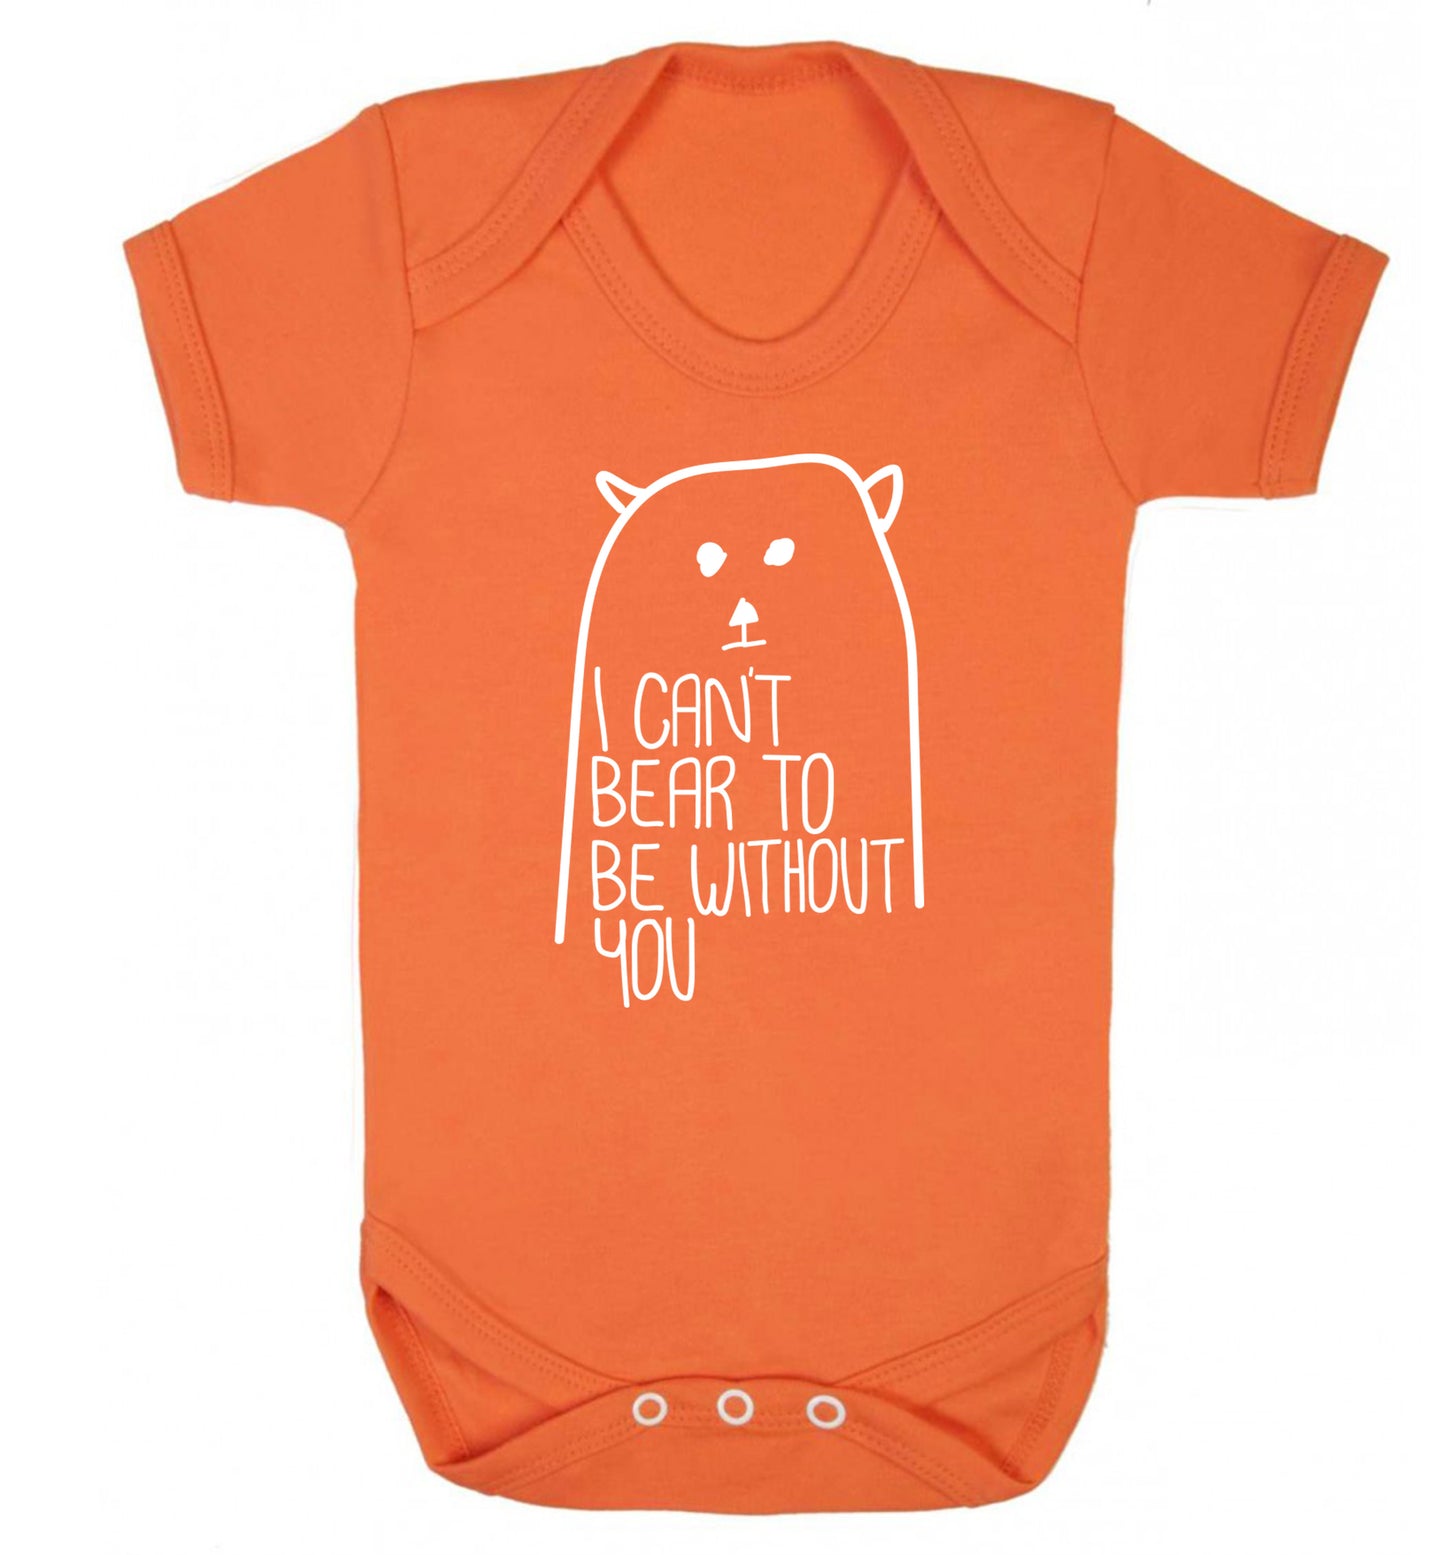 I can't bear to be without you Baby Vest orange 18-24 months